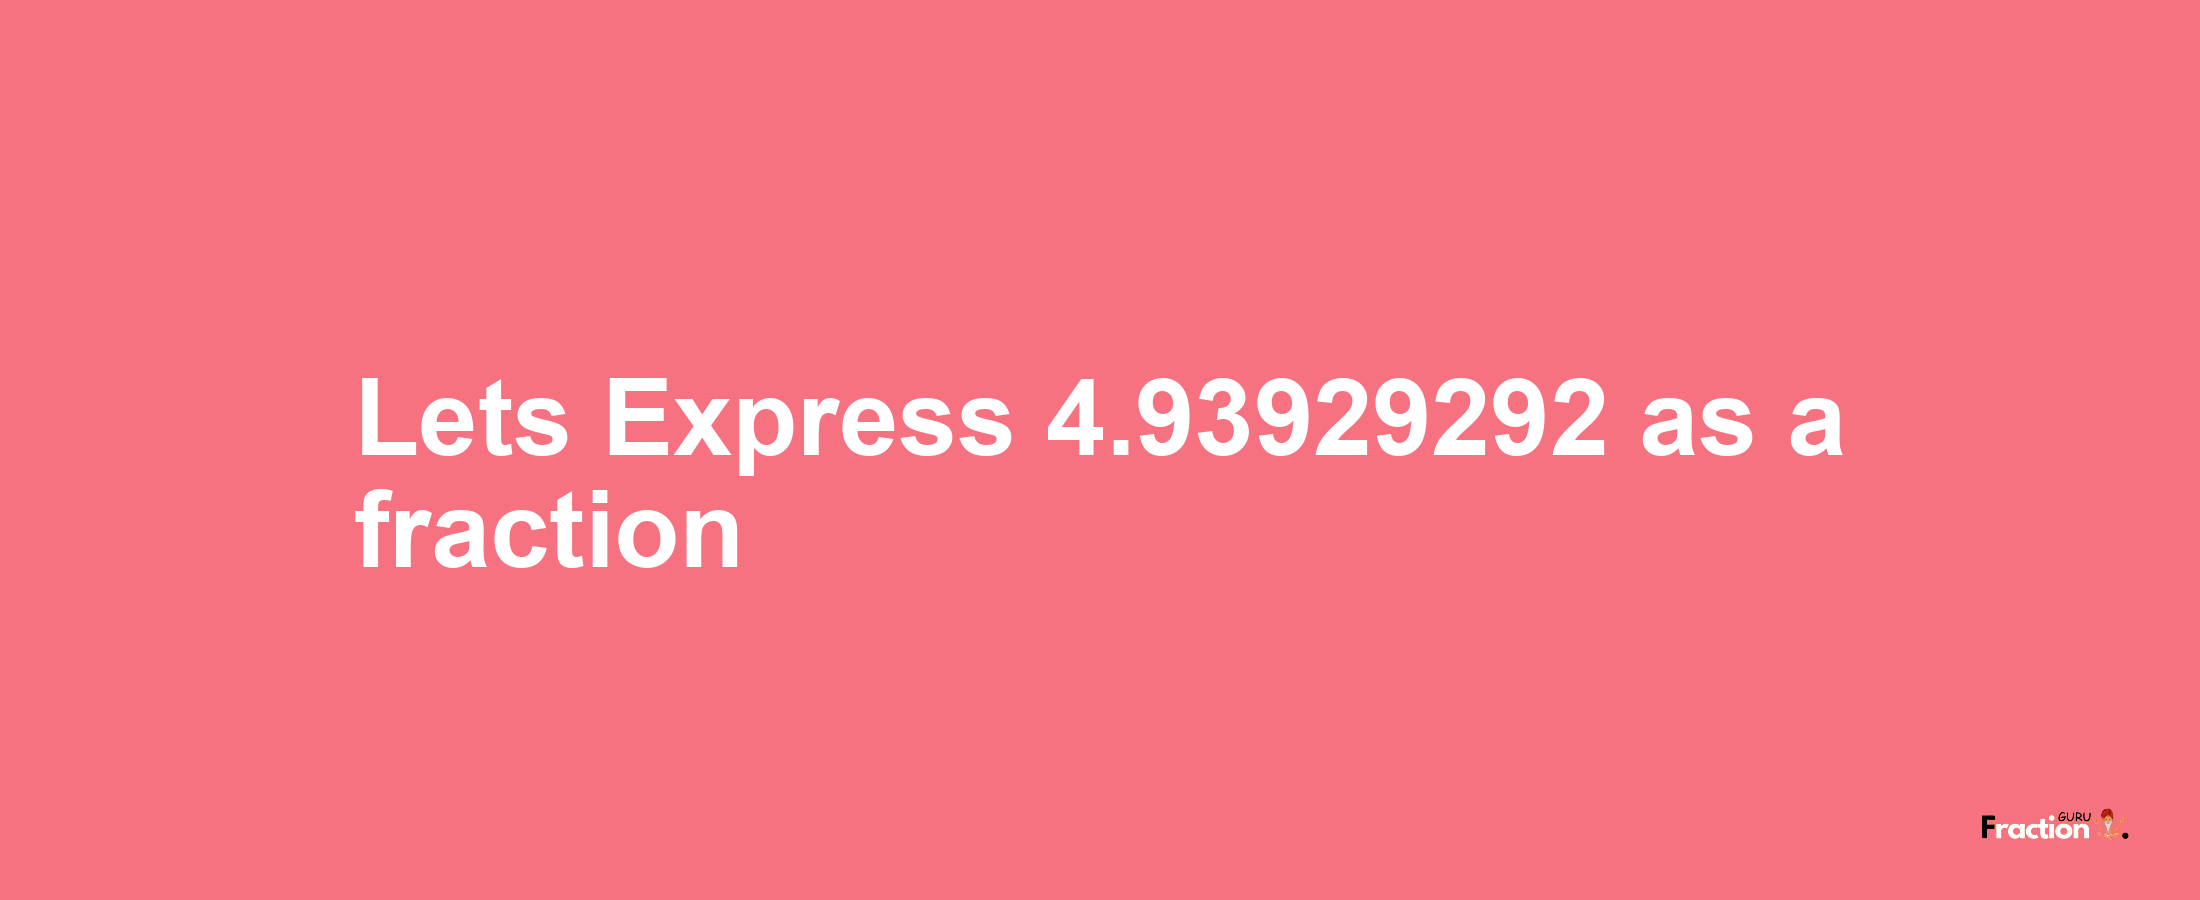 Lets Express 4.93929292 as afraction